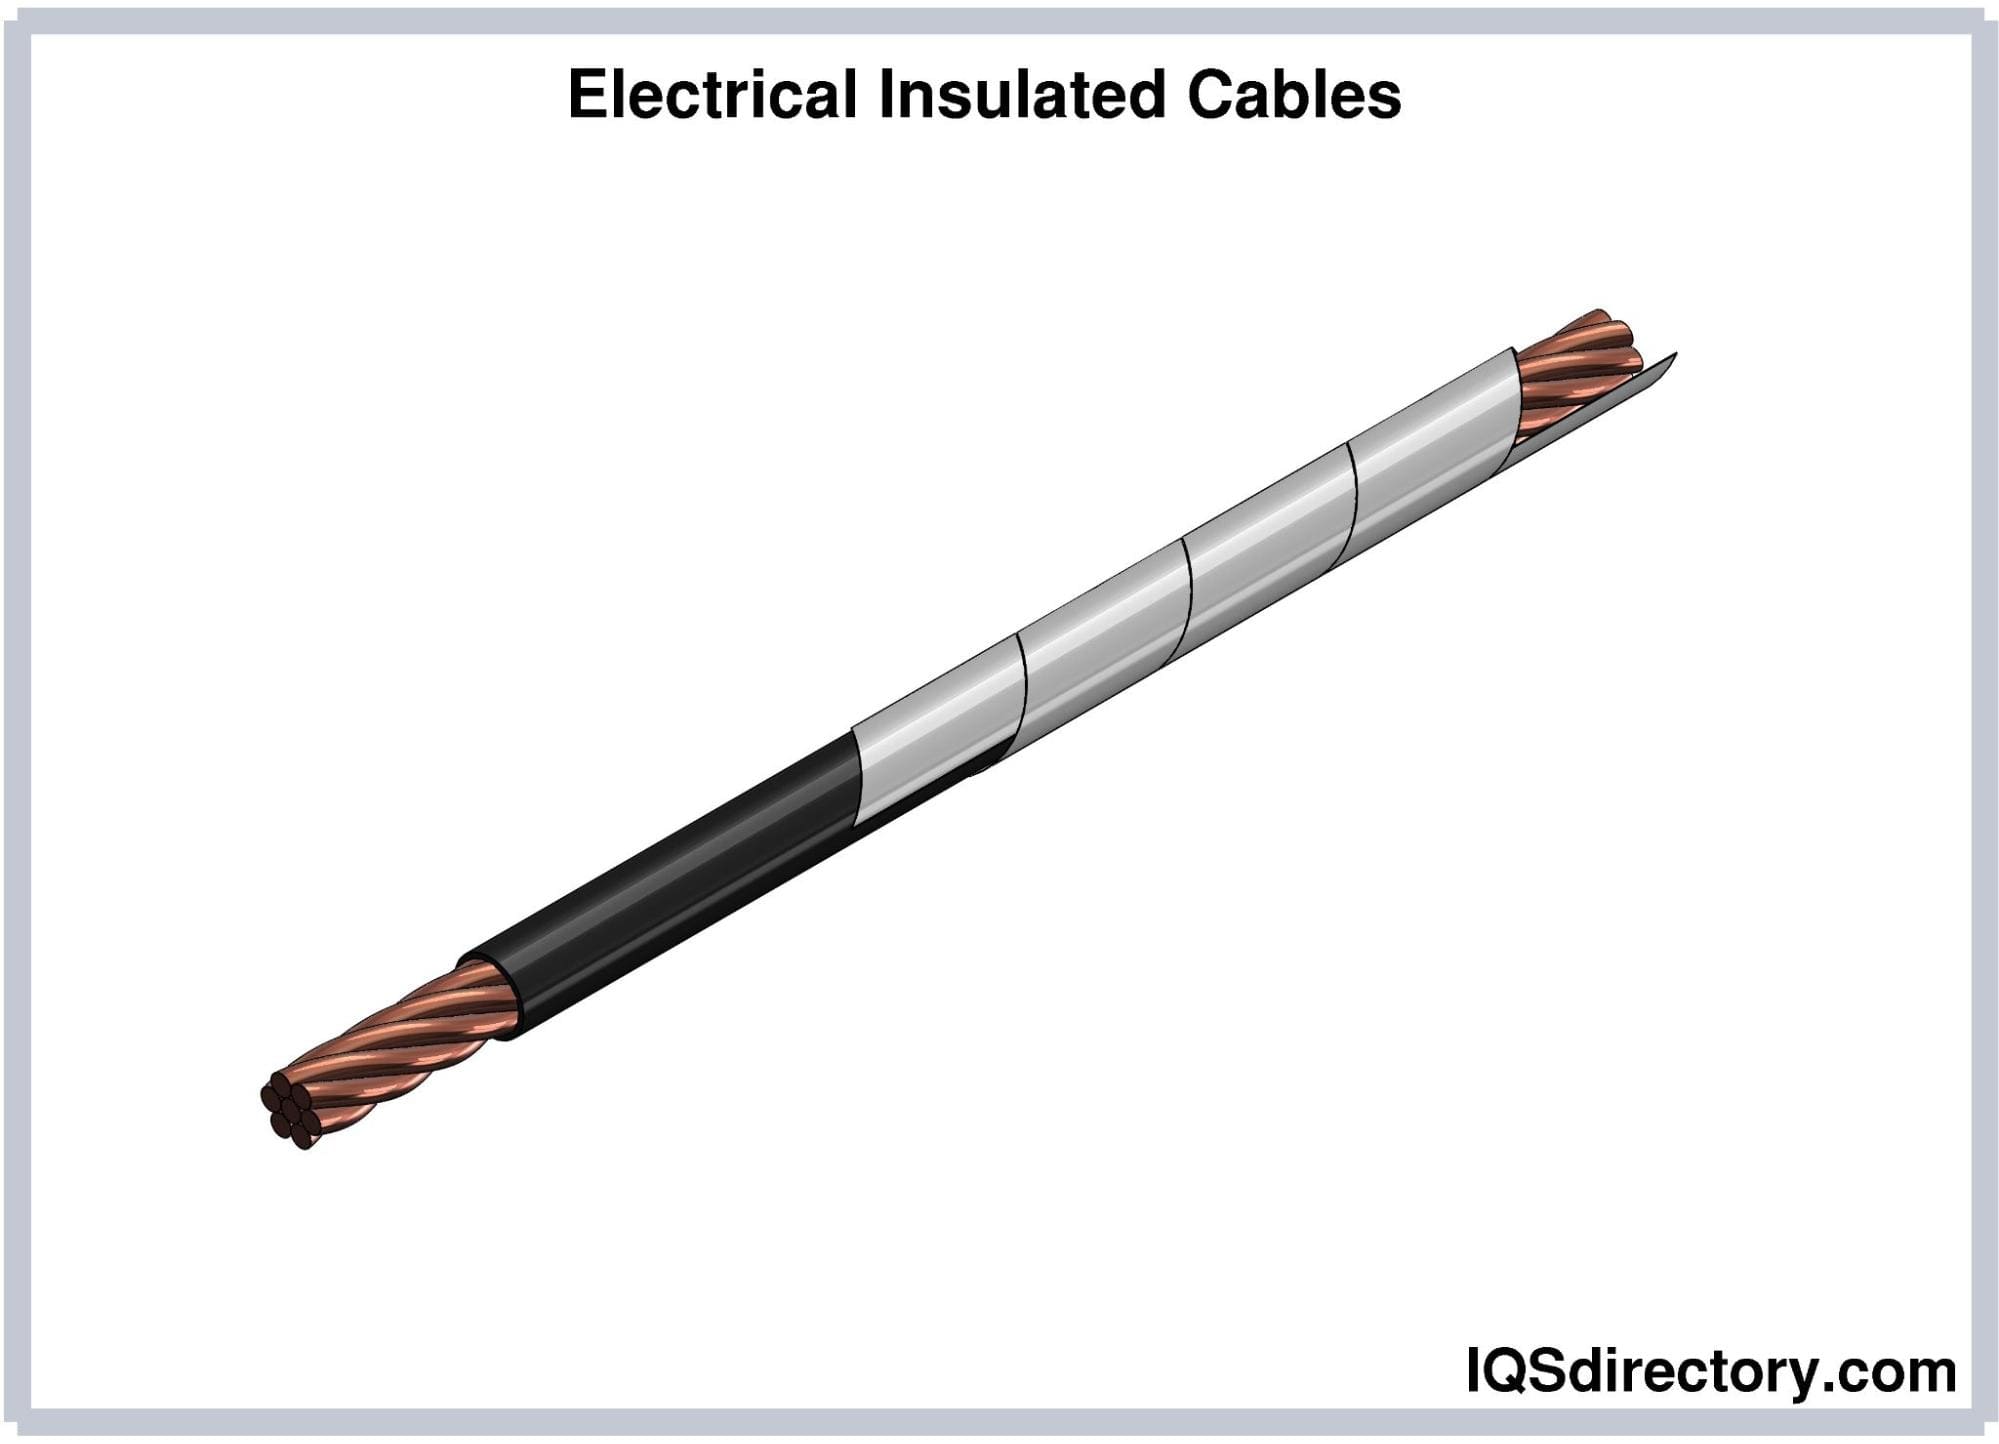 Electrical Insulated Cables